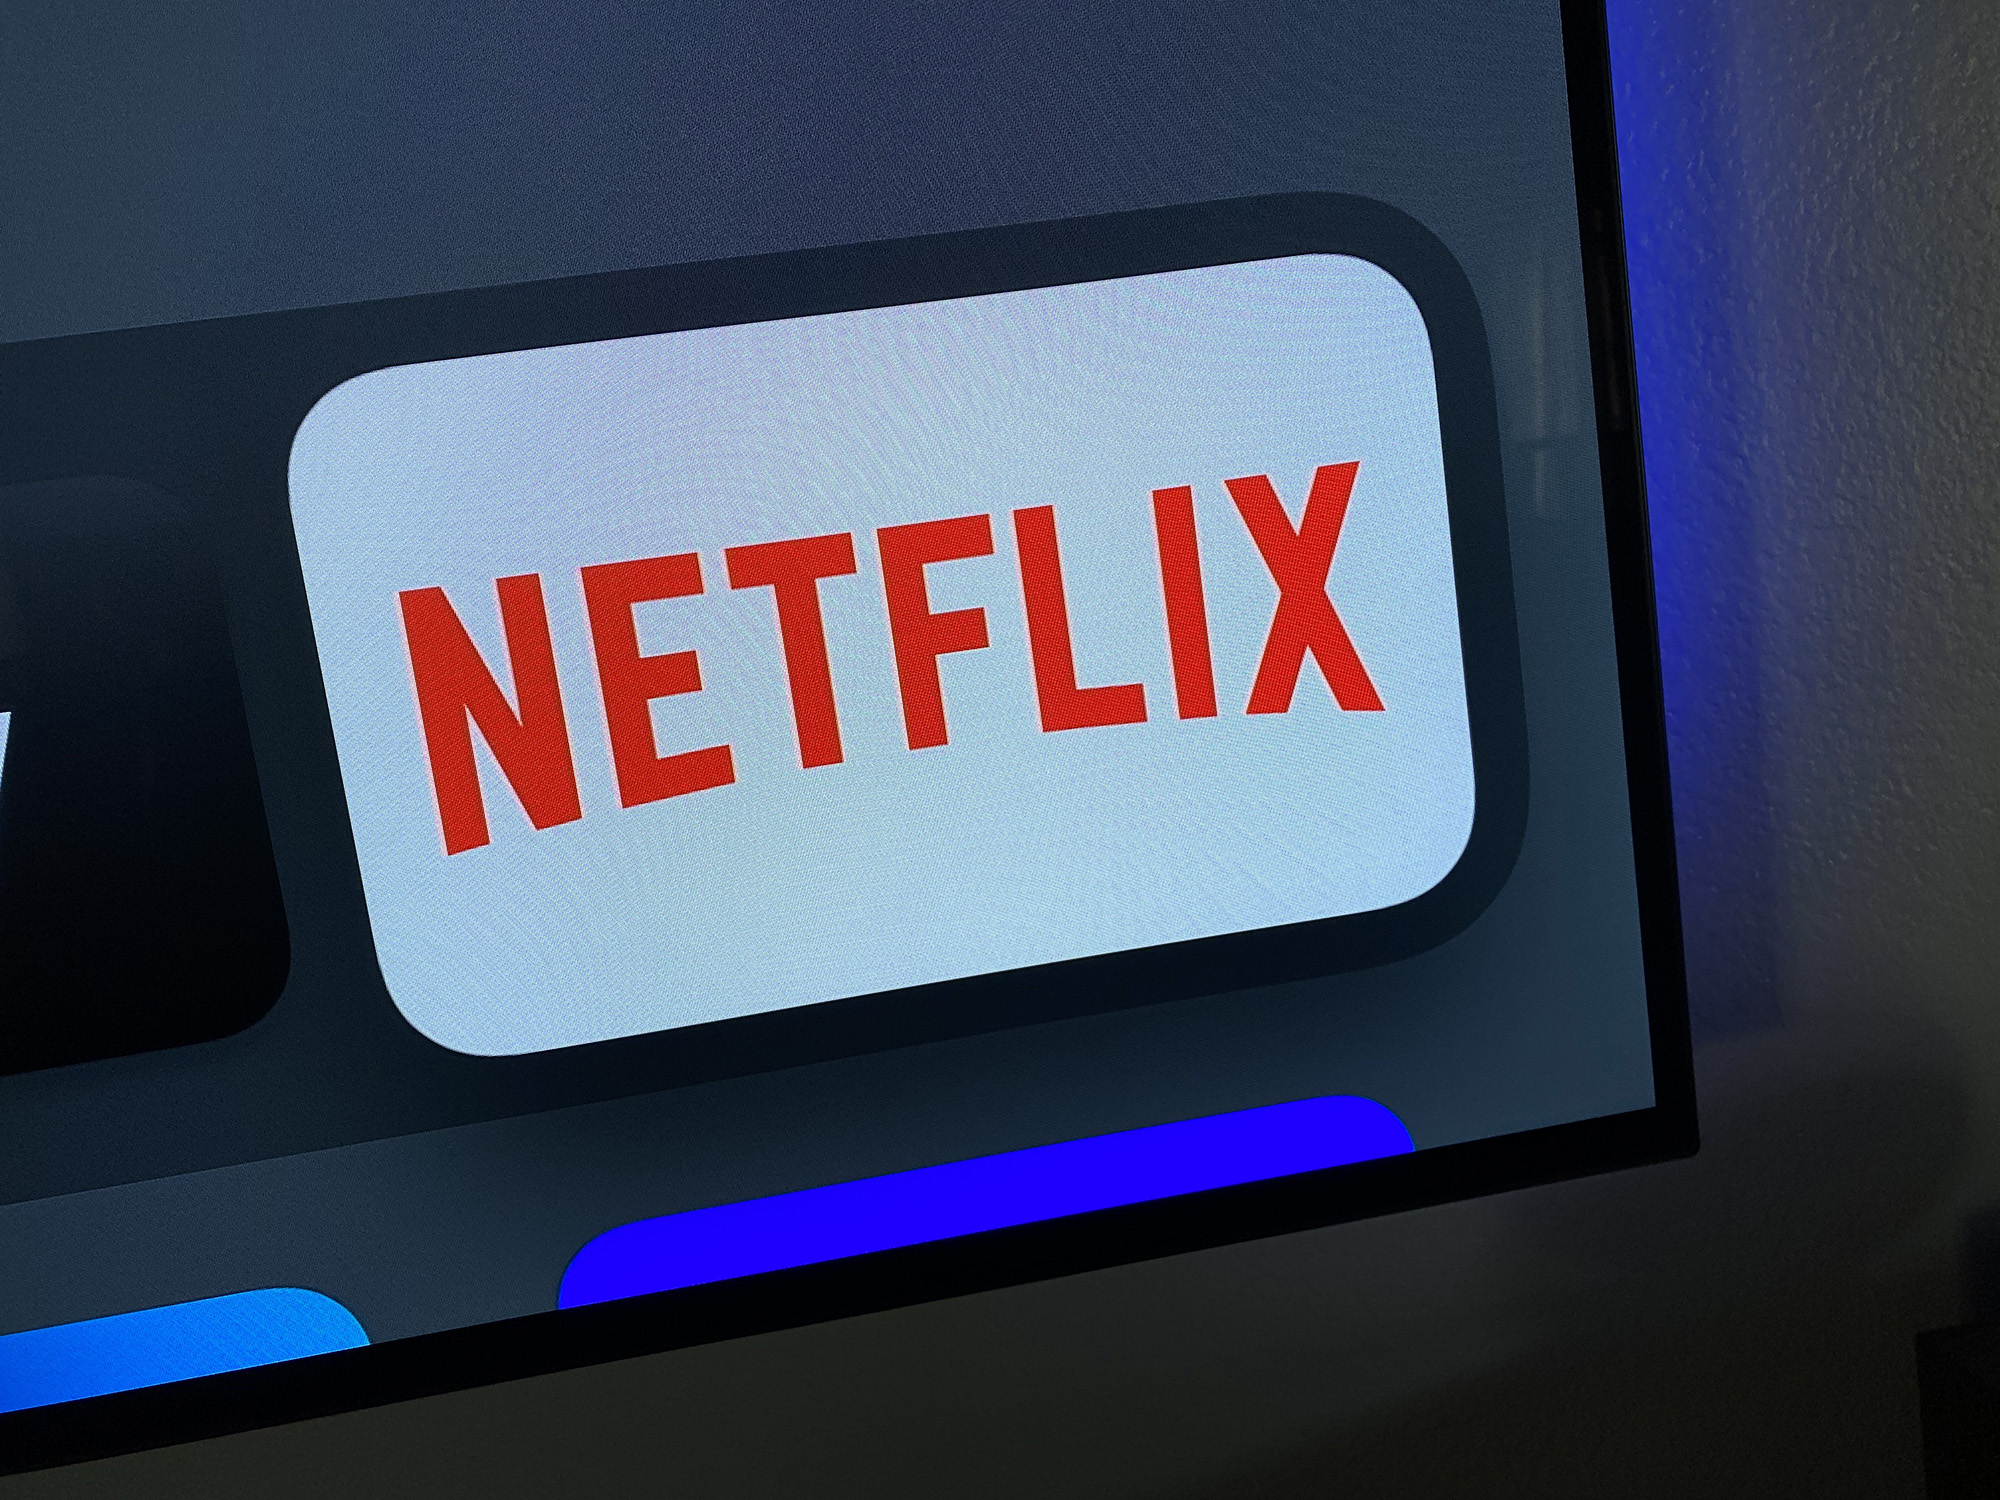 Netflix launches new low-cost tier, here’s how to get
it